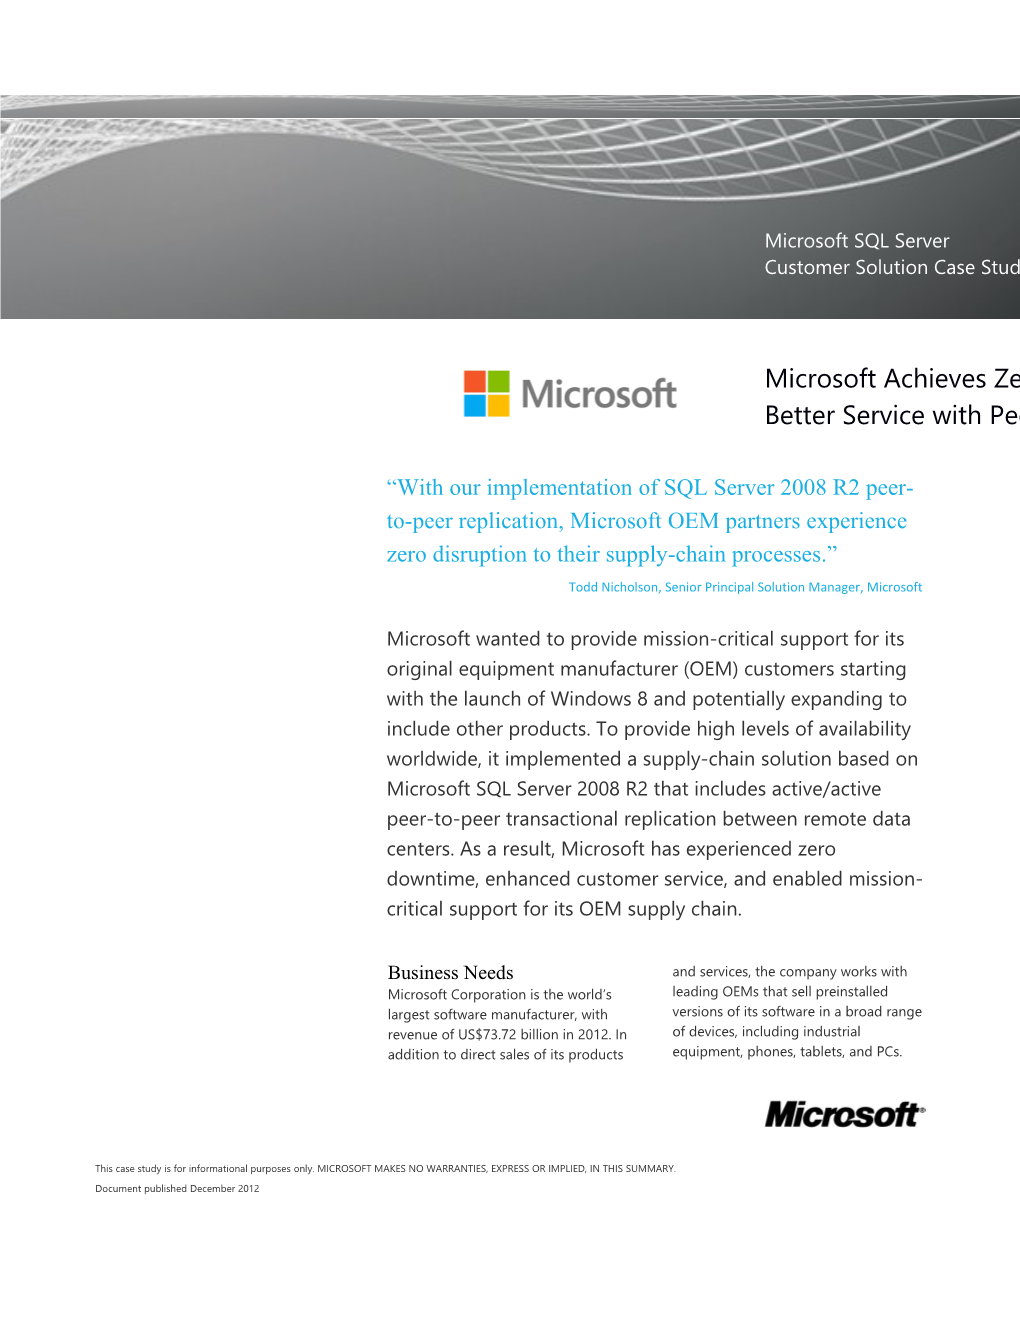 Microsoft Achieves Zero Downtime and Better Service with Peer-To-Peer Replication